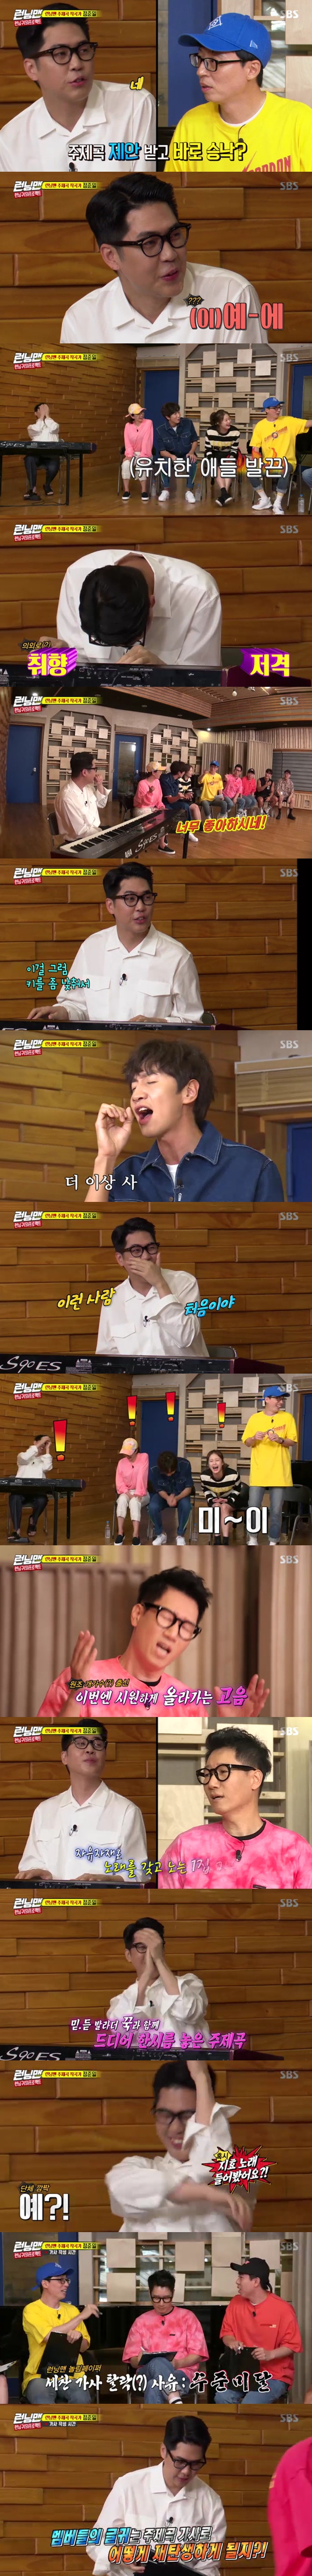 Chemie of Running Man with Jeong Joon-Il exploded from first meetingEmotional singer-songwriter Jeong Joon-Il appeared on SBS Running Man, which was broadcast on August 4, as a composer of the 9th anniversary theme song, and laughed with anti-chemie from his first meeting with the members.The main characters such as Hold me, Confessions, To You, and the drama Dokkaebi OST First Eye appeared with the hot cheers of Running Man members on this day.Jeong Joon-Il, who was staying in New York, USA when he received the 9th anniversary theme song Running Man, said he decided to appear without worrying.I was a regular Running Man fan.However, Jin Joon-Il reluctantly answered Yes to the question Do you laugh a lot when you see Running Man? And received a warm response and got doubts from the members.Kim Jong-kook said, We are very childish, and the members showed off the childish gag on the spot.Surprisingly, such a childish gag sniped at the taste of Jeong Joon-Il, and Jeong Joon-Il burst into bread.The quiet studio atmosphere on the day of the intense fanming out of Jeong Joon-Il was hot.Jeong Joon-Il has started to check the members singing skills to share the Running Man range.The song that became the standard was Kim Bum-soos I Want to See, and the members decided to challenge with confidence.Song Ji-hyo, famous for not singing, came out as the first runner; Song Ji-hyos song was interrupted by a staff laughing.Next runner Lee Kwang-soo showed unexpected high-pitched digestion, and surprised Jin Joon-Il also applauded.However, Yoo Jae-Suk, who saw this, laughed at the fantasy method, saying it was a simple method like a eunuch.As the turn of National MC Yoo Jae-Suk approached, Jeong Joon-Il hit the piano keyboard and instructed Yoo Jae-Suk to follow him.However, Yoo Jae-Suk rather told Jeong Joon-Il, I will follow you, and made Jeong Joon-Il burst into bread.Then Yoo Jae-Suk showed off his compositional method from the first note, causing him to fall again. Haha said, What is it?What is it that youre pressed by scissors? In the unique singing parade of Running Man members, which continues to the scissors singing method in the eunuch singing method, Jin Joon-Il could not stop laughing.If so, is the aid dog singer Ji Suk-jin different? Ji Suk-jin seemed to show off his extraordinary skills as a first-rate singer.When the high notes came out, I controlled the sound with self, and in the case of the high sound of the tumult, I played with the sound as much as I could.Therefore, Jin Joon-Il has reached almost fainting level.Jeong Joon-Il, who encountered Ji Suk-jins song, said, It is an old style to play with a beat.Everyone laughed at the Jeong Joon-Il style Cida appreciation that everyone knew and did not know.Yang Se-chan sang in vain as he was known.Yang Se-chan, who focused his attention on the mean eye treatment, admired the perfect high-pitched treatment, and Kim Jong-kook, a singer, raised a key and called I want to see and brought out a sweet beauty and admiration.As a result, Jeong Joon-Il, who encountered the songs of all members of Running Man, questioned the question Is not it worse than I thought?At the end of the twists and turns, the time came to write the lyrics of the theme song after the check of the range.I received the lyrics written by Miri members by email, and I thought about not doing it, said Jeong Joon-Il.The members who were stabbed in this were fully sympathetic to the heart of Jeong Joon-Il. The story of the members is essential for the lyrics work.Jeong Joon-Il sighed and told the members of the music Miri had prepared. He will release the 9-year journey of Running Man to the beautiful song.The members of the Running Man who heard this for the first time shouted, I have become calm and calm.While the members under-level lyrics continued, Jeong Joon-Il tipped that I was curious about the first time I joined Running Man.The members then wrote the lyrics, recalling the early memories of Running Man; afterward, they delivered the lyrics they wrote directly to Jin Joon-Il.Indeed, the members writings are wondering how to re-create through the Jeong Joon-Il.When asked about his last testimony, Jeong Joon-Il asked, What do you mean?, which embarrassed the members.This natural style of Jin Joon-Il had a fresh smile on Sunday afternoon with untouched charm.bak-beauty